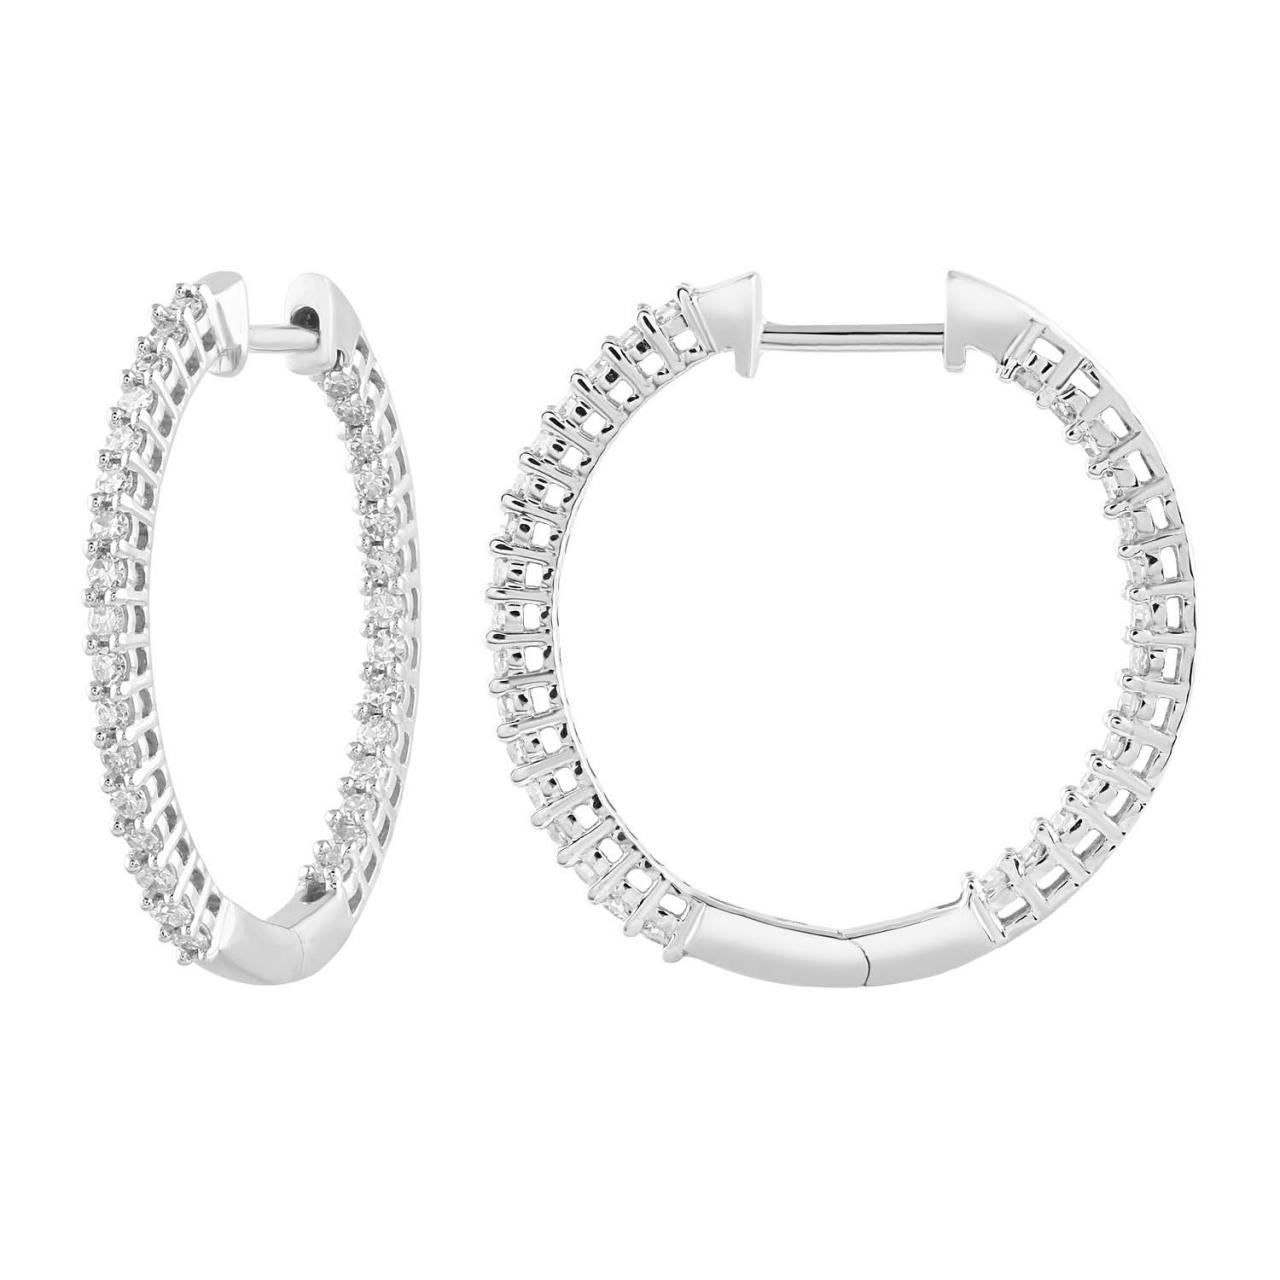 White gold hoops with diamonds